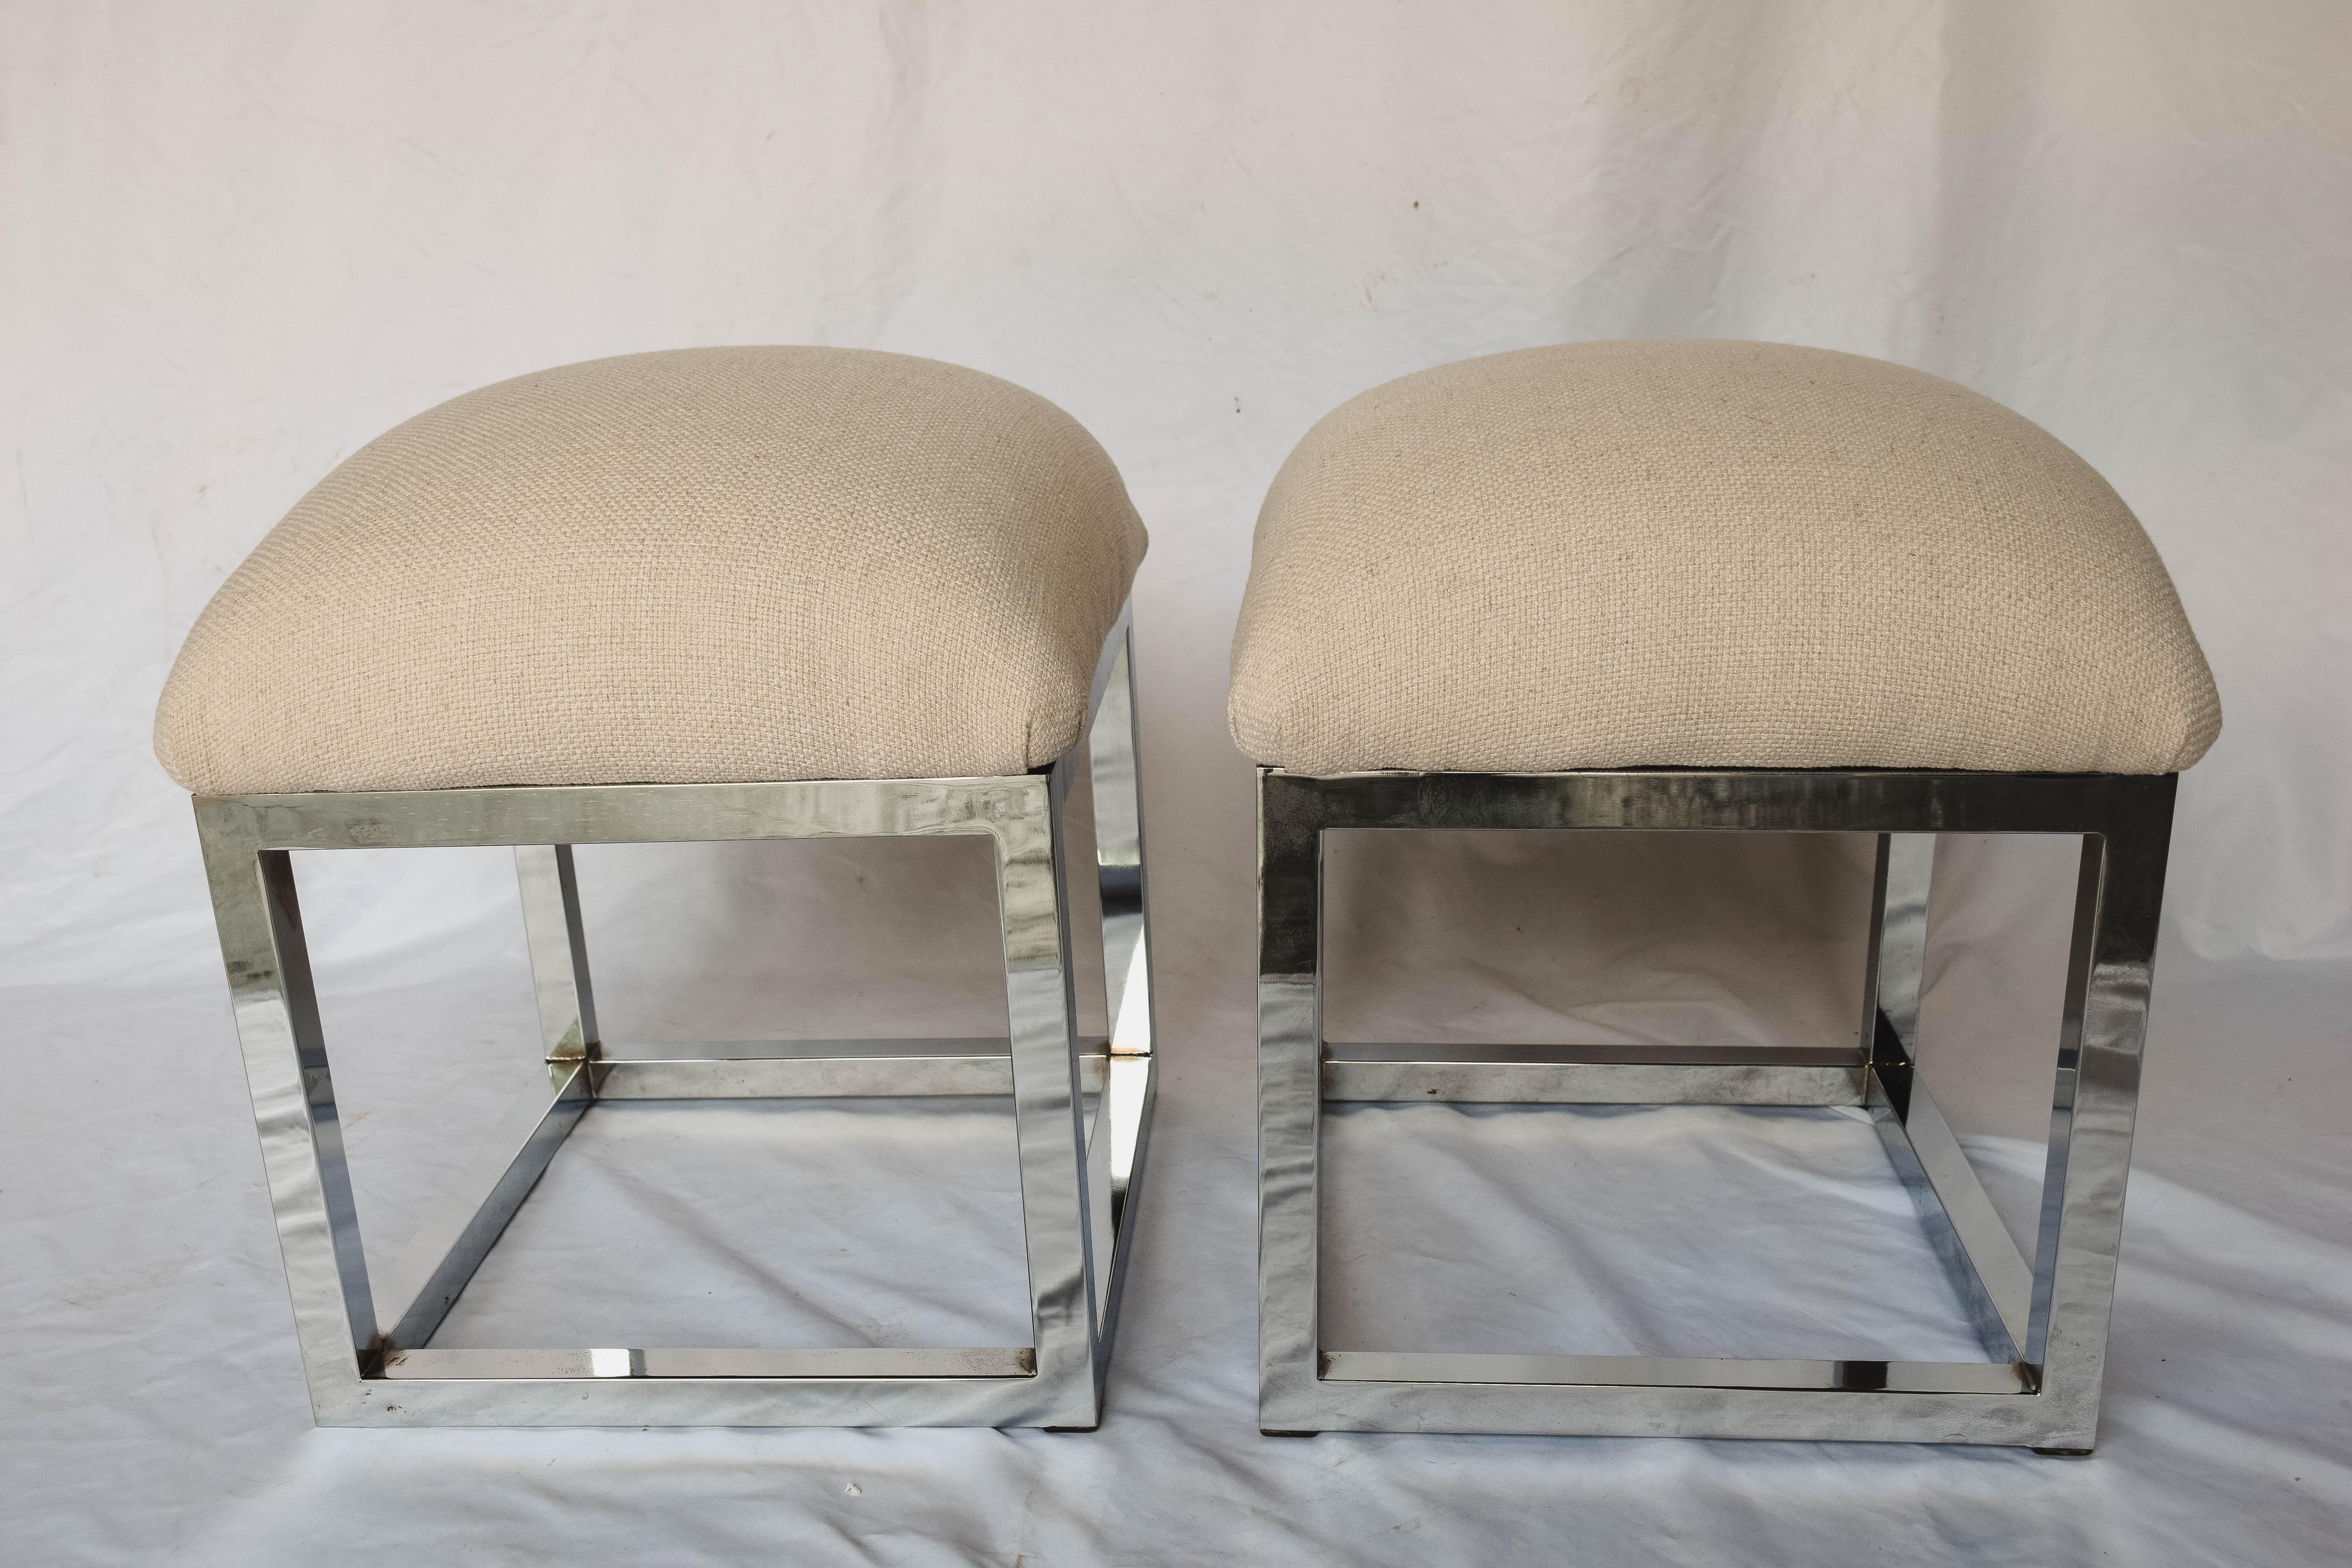 American Pair of Mid-Century Modern Cube Chrome Ottomans Attributed to Milo Baughman